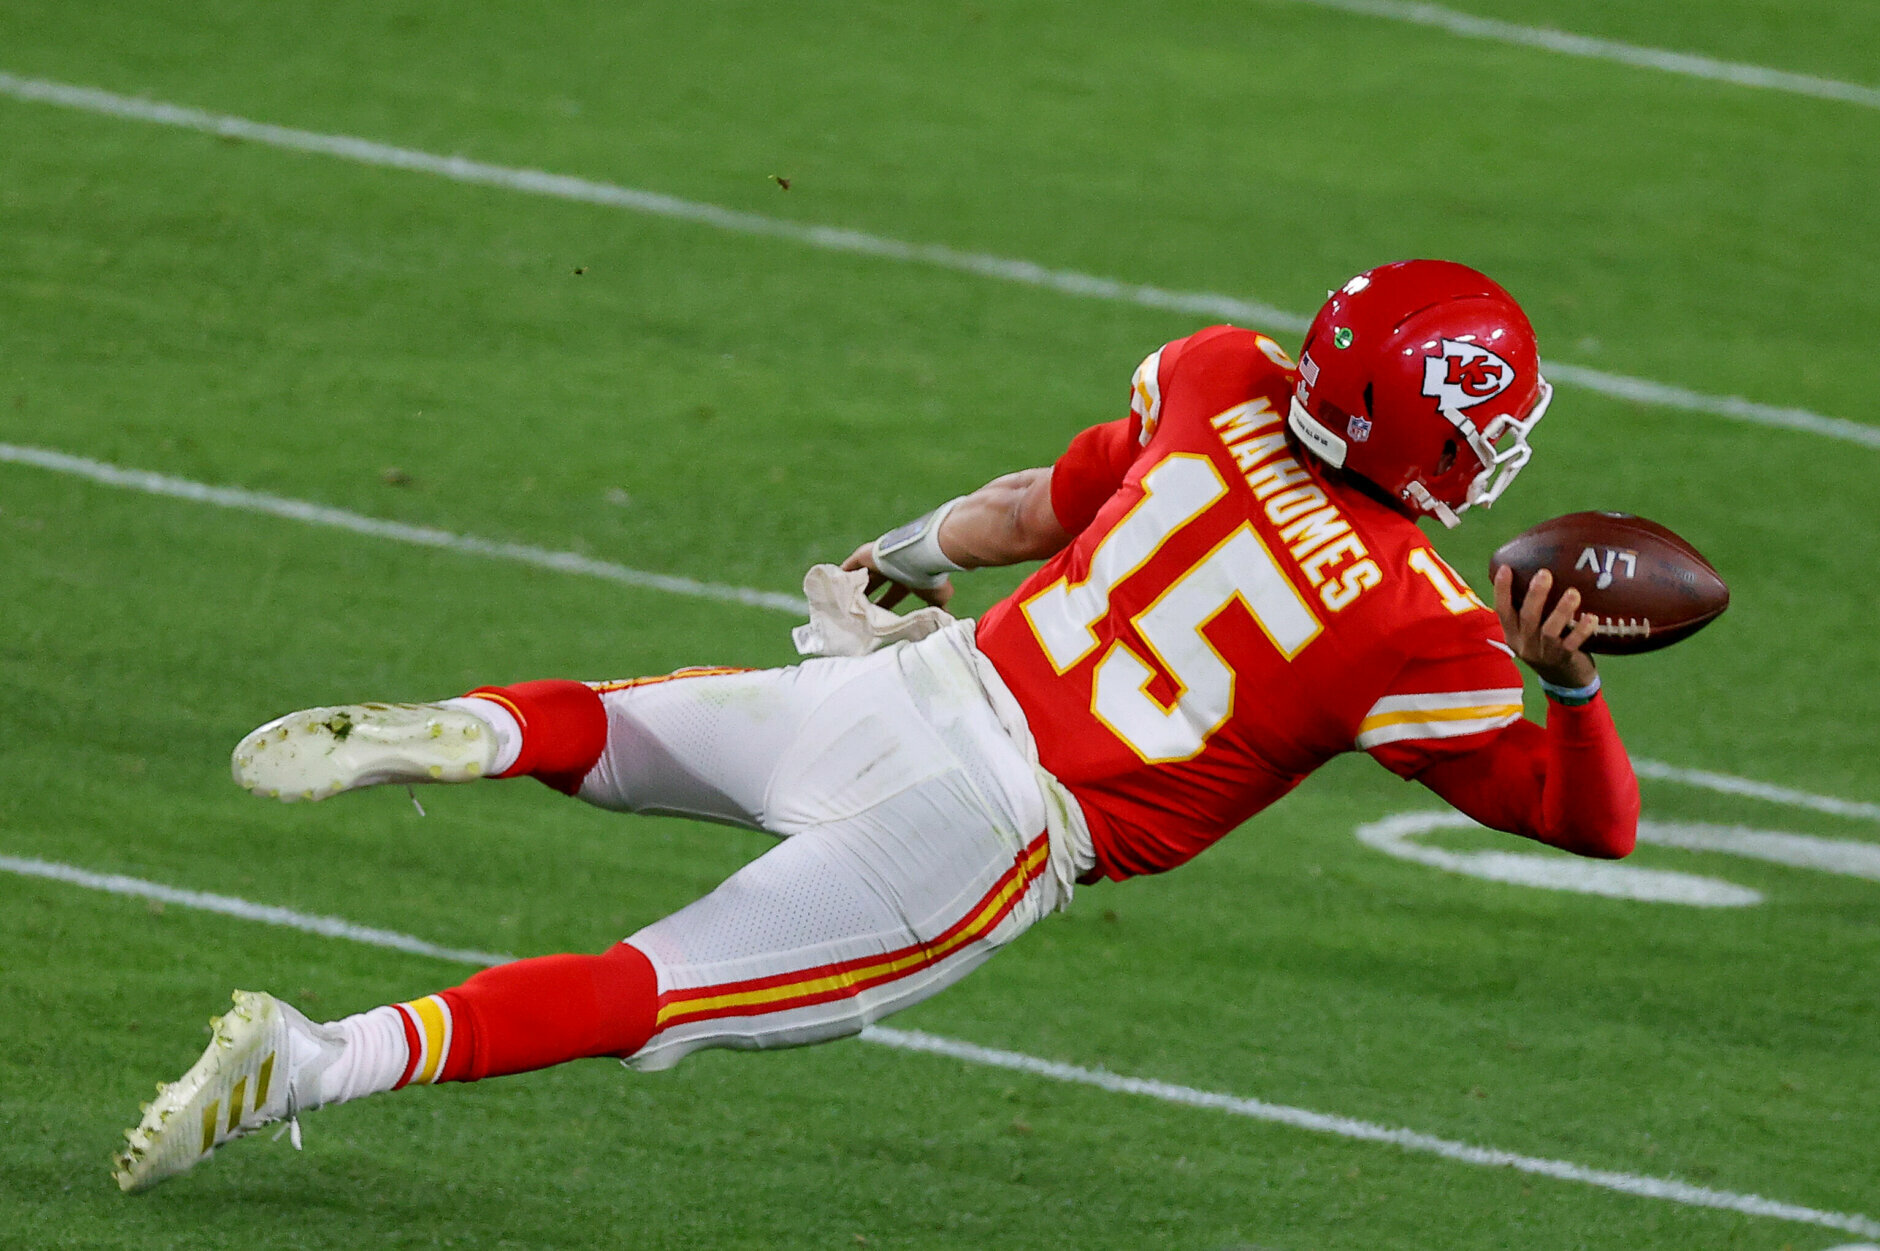 <h3>Offensive Player of the Year</h3>
<p>Patrick Mahomes — Kansas City Chiefs</p>
